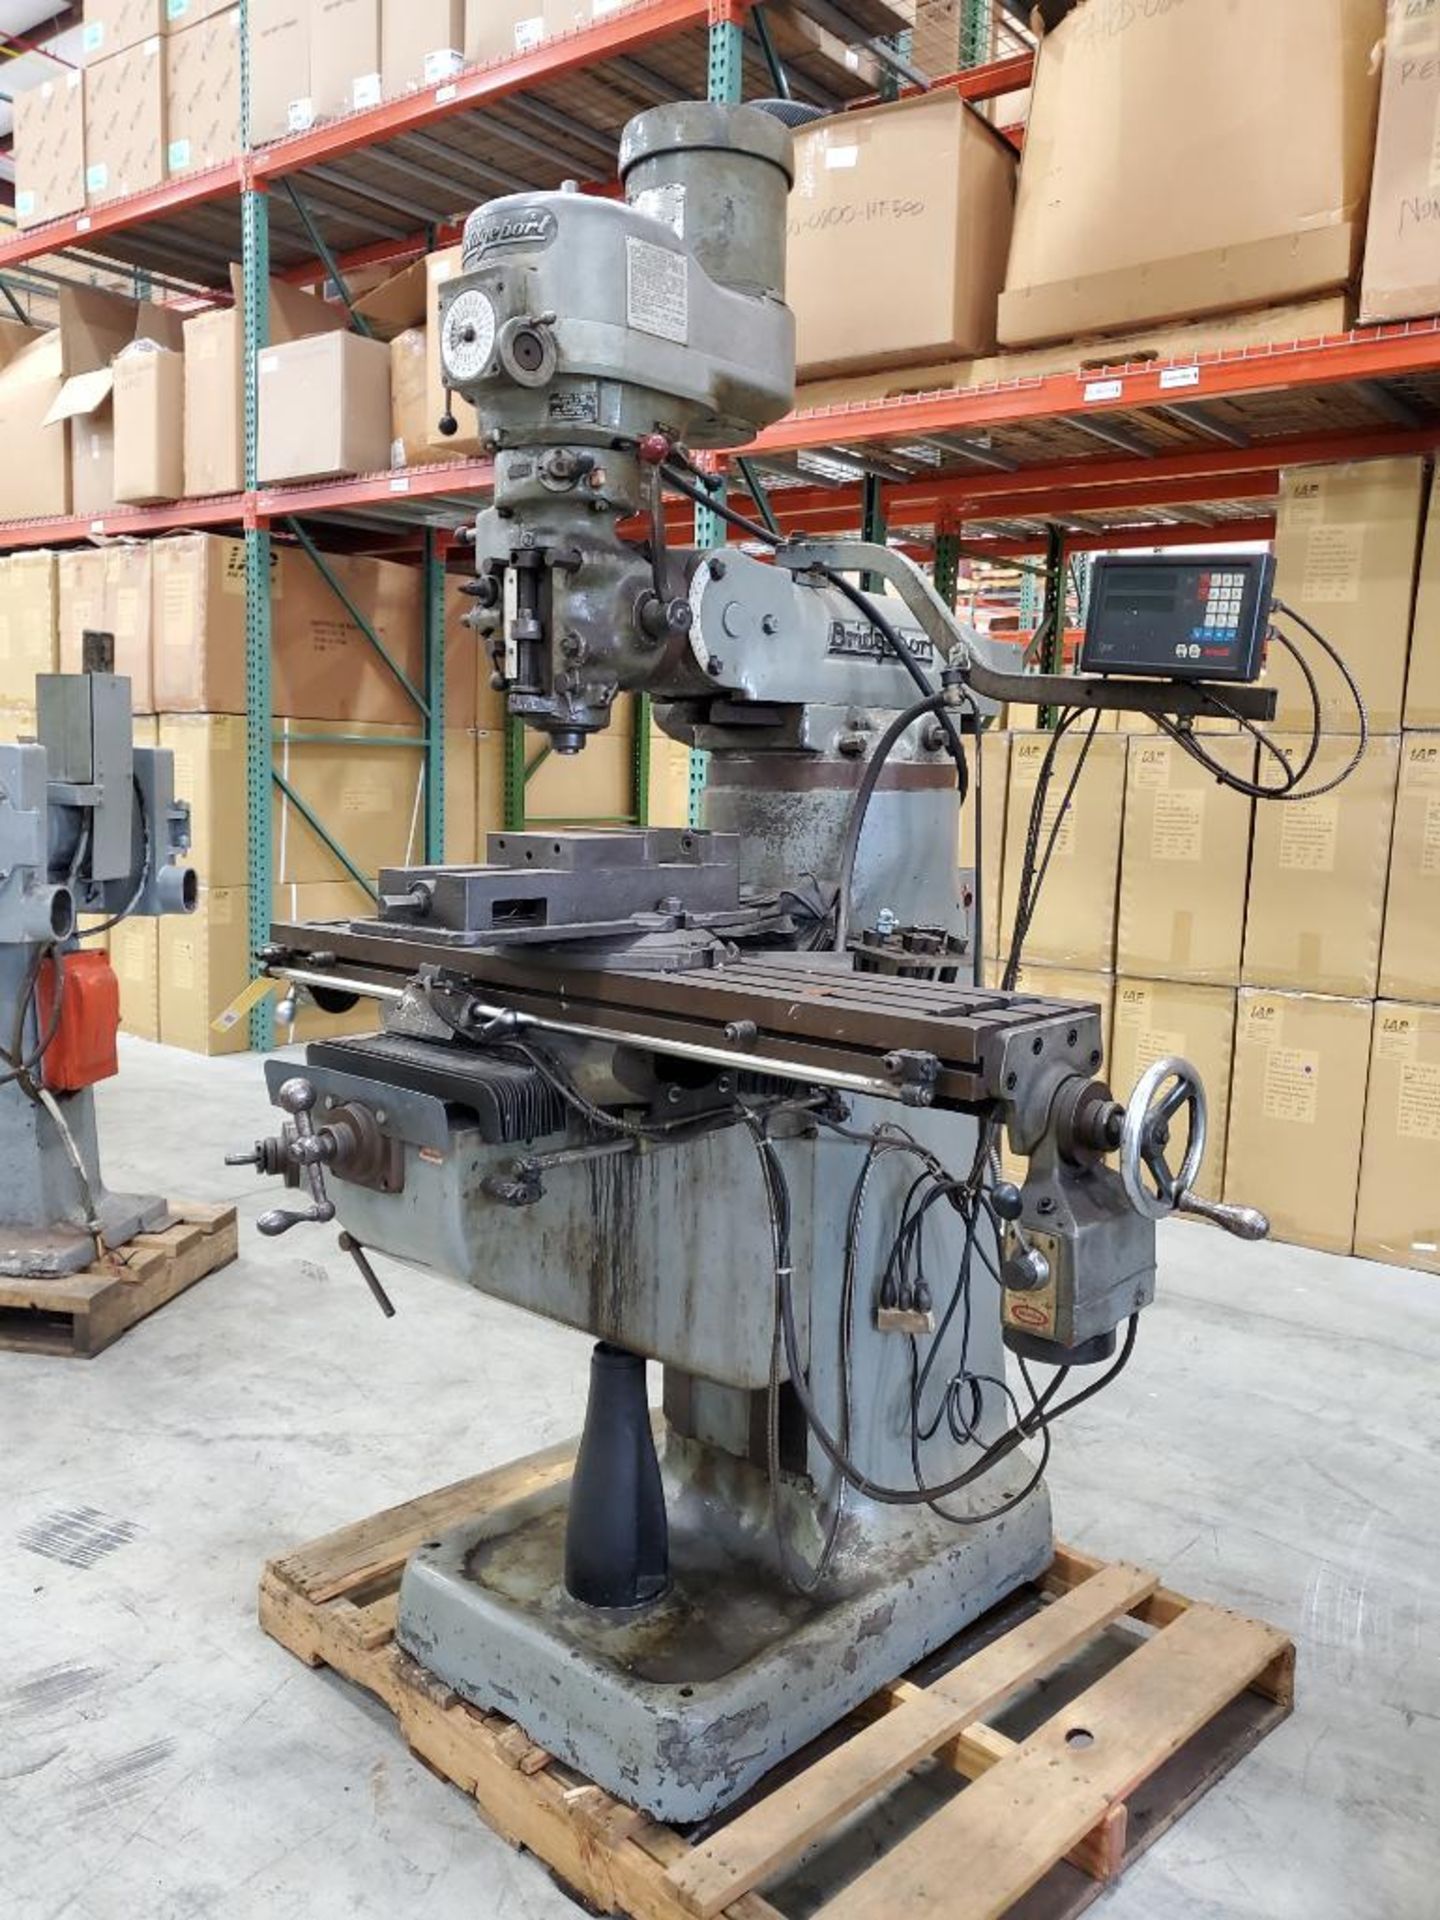 Bridgeport Vertical Milling Machine, 48" x 9" Table, Newall Topaz 2-Axis DRO Control, 6" Rotary Mach - Image 2 of 13